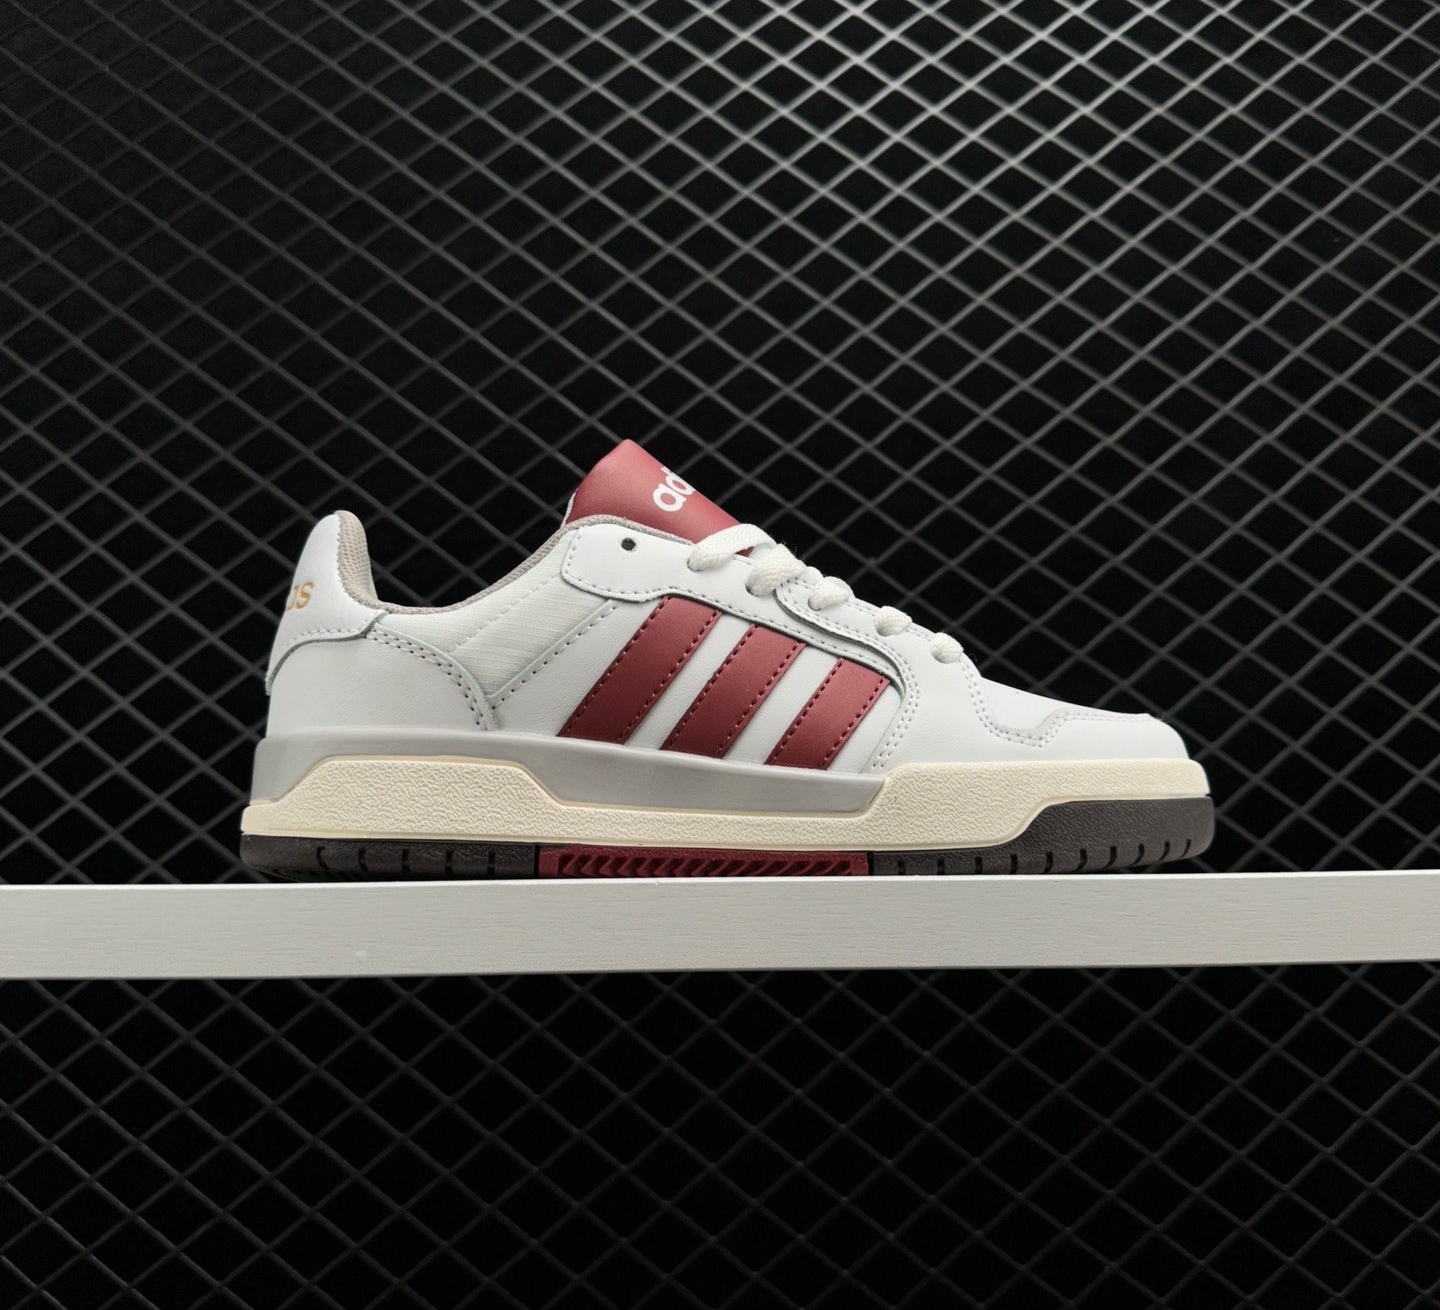 Adidas Neo Entrap White Red FW3462 - Stylish Sneakers for Urban Fashion | Free Shipping